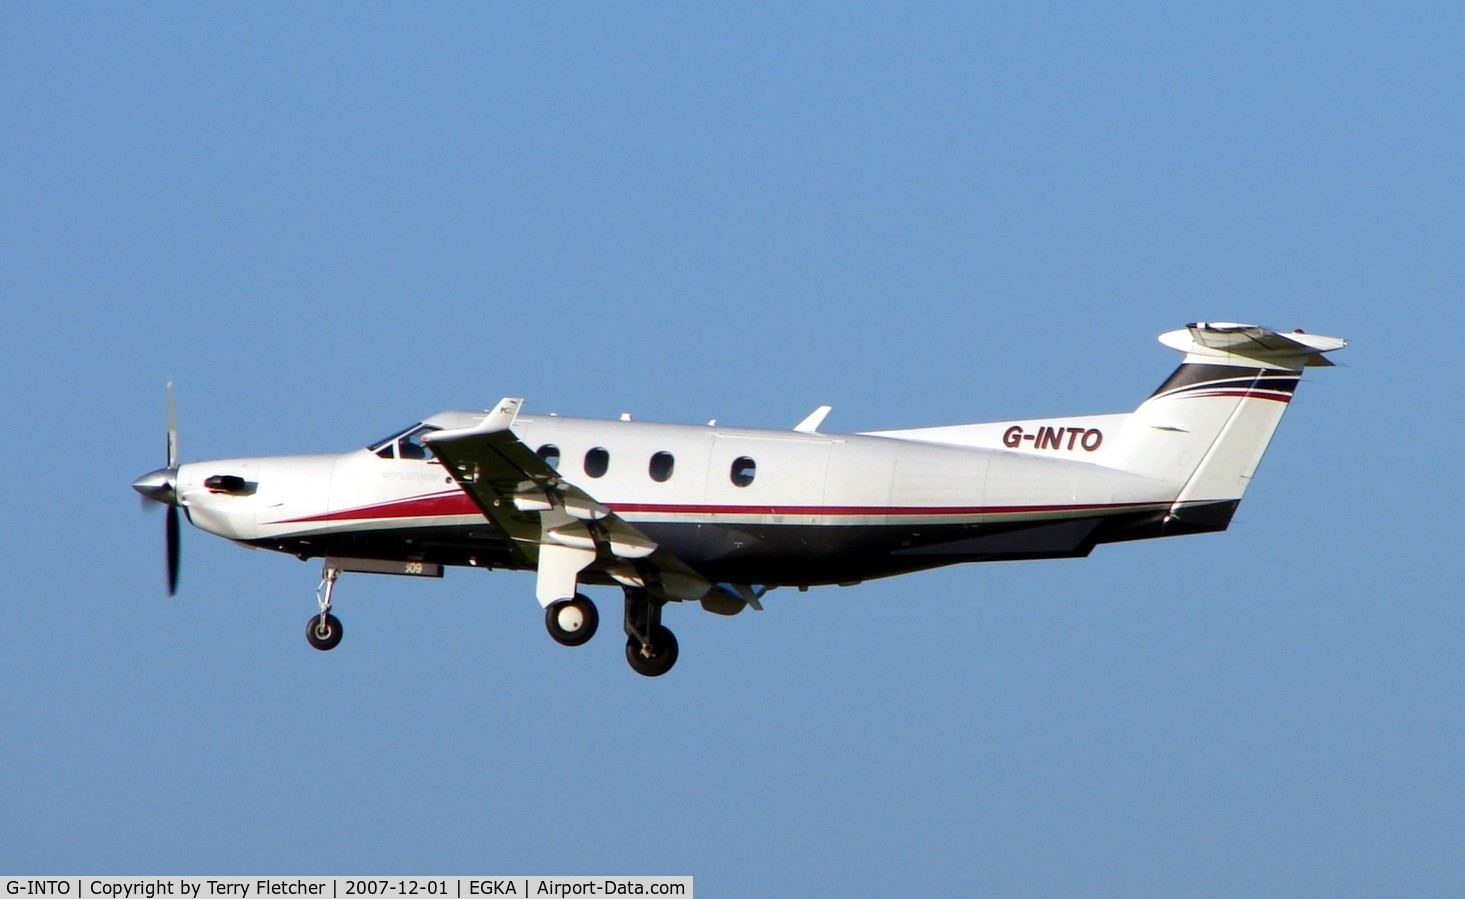 G-INTO, 2005 Pilatus PC-12/45 C/N 609, PC12 takes off from Shoreham on a bright sunny morning